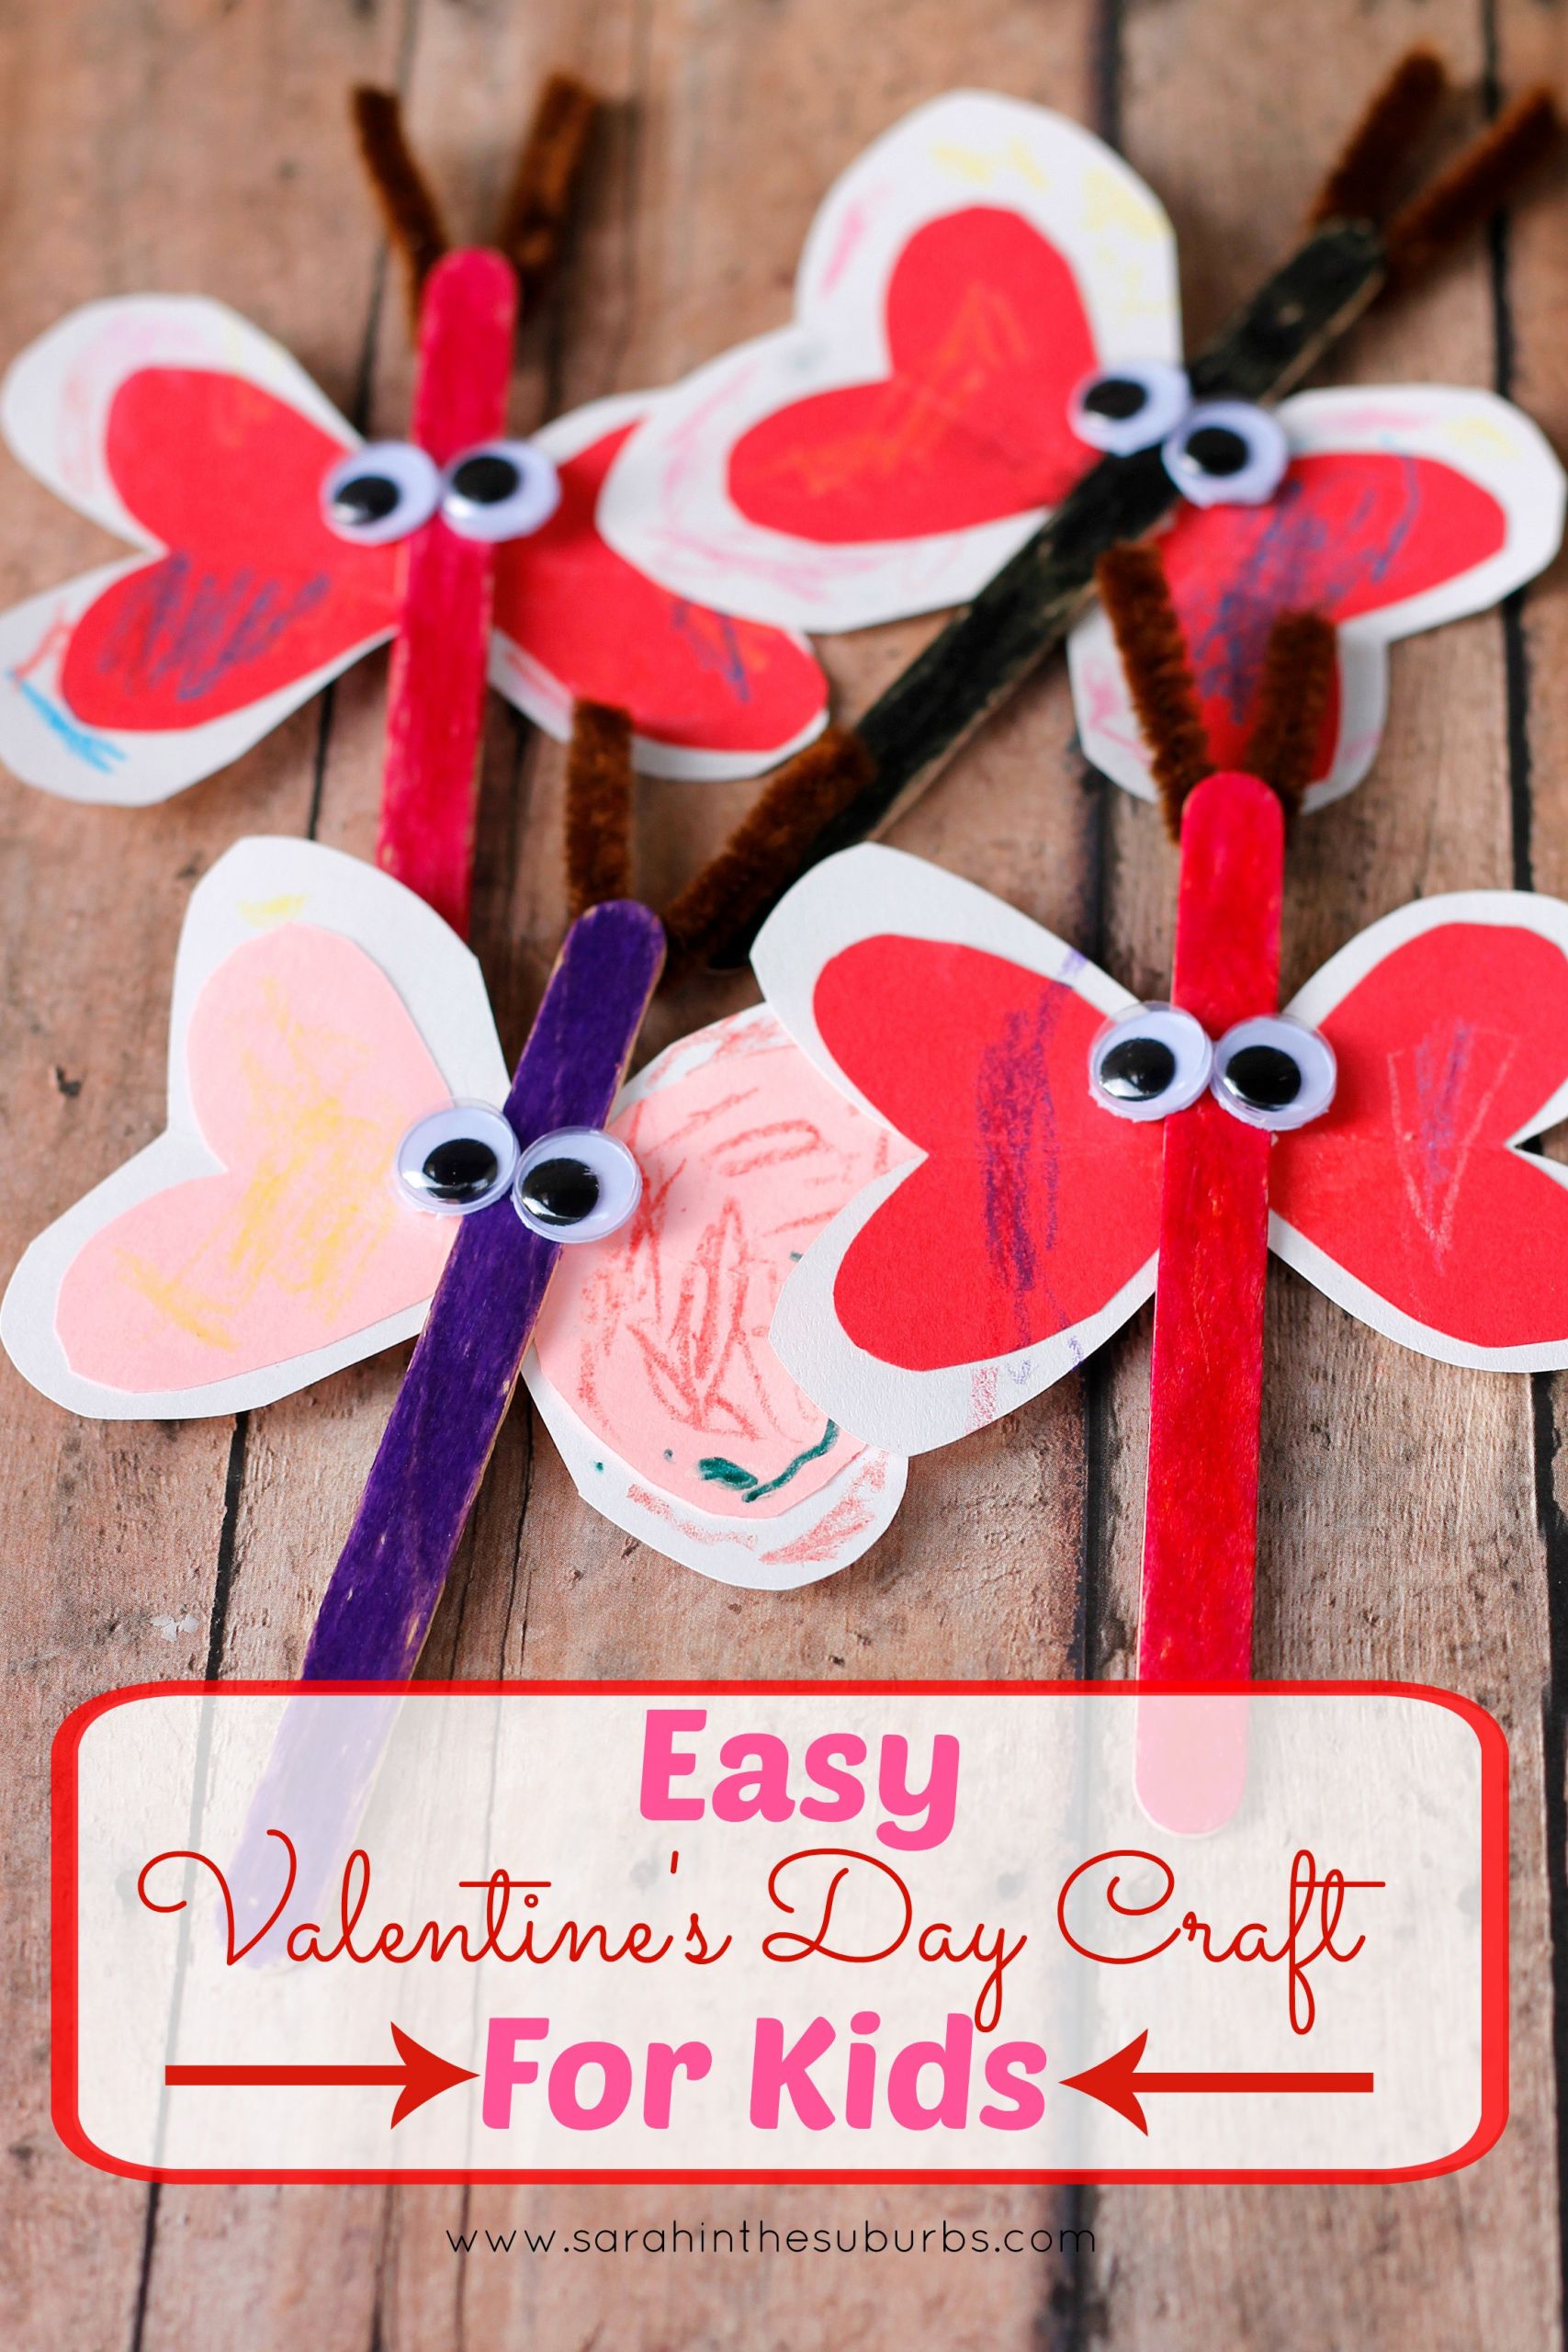 Toddler Valentines Craft Ideas
 Love Bug Valentine s Day Craft for Kids Sarah in the Suburbs